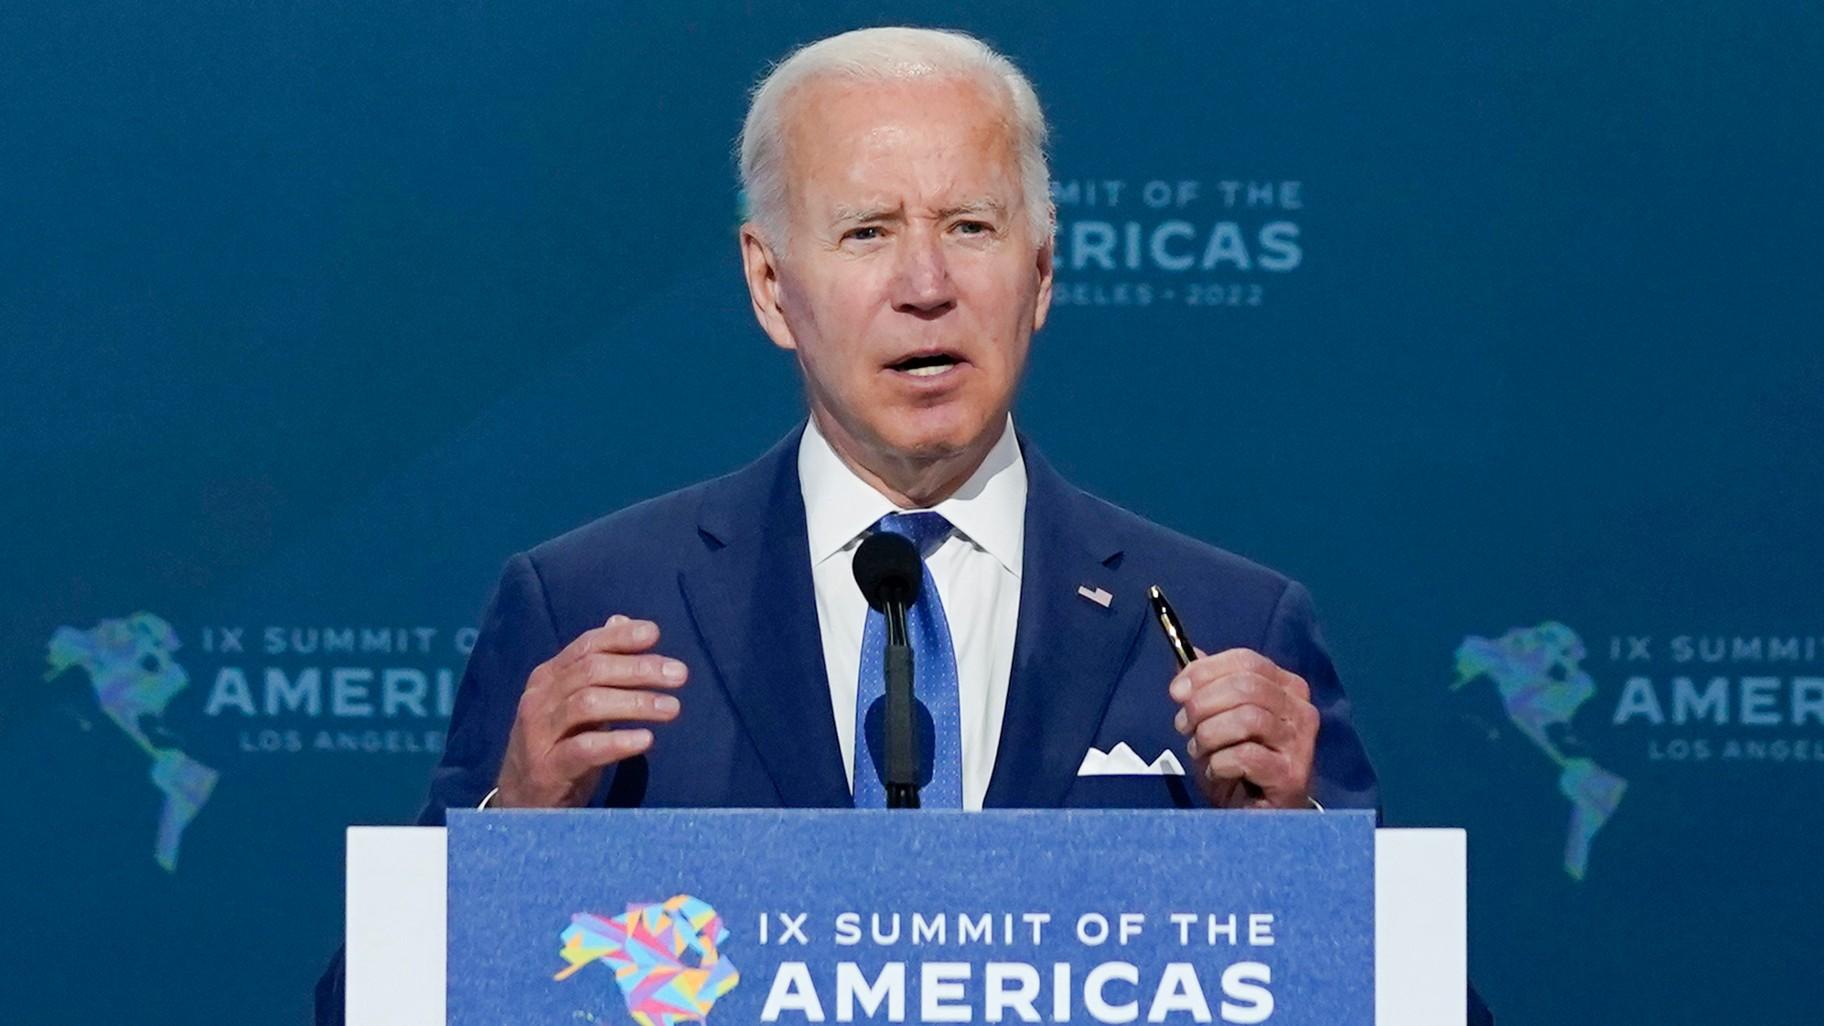 President Joe Biden speaks during the opening plenary session of the Summit of the Americas, June 9, 2022, in Los Angeles. (AP Photo / Evan Vucci, File)